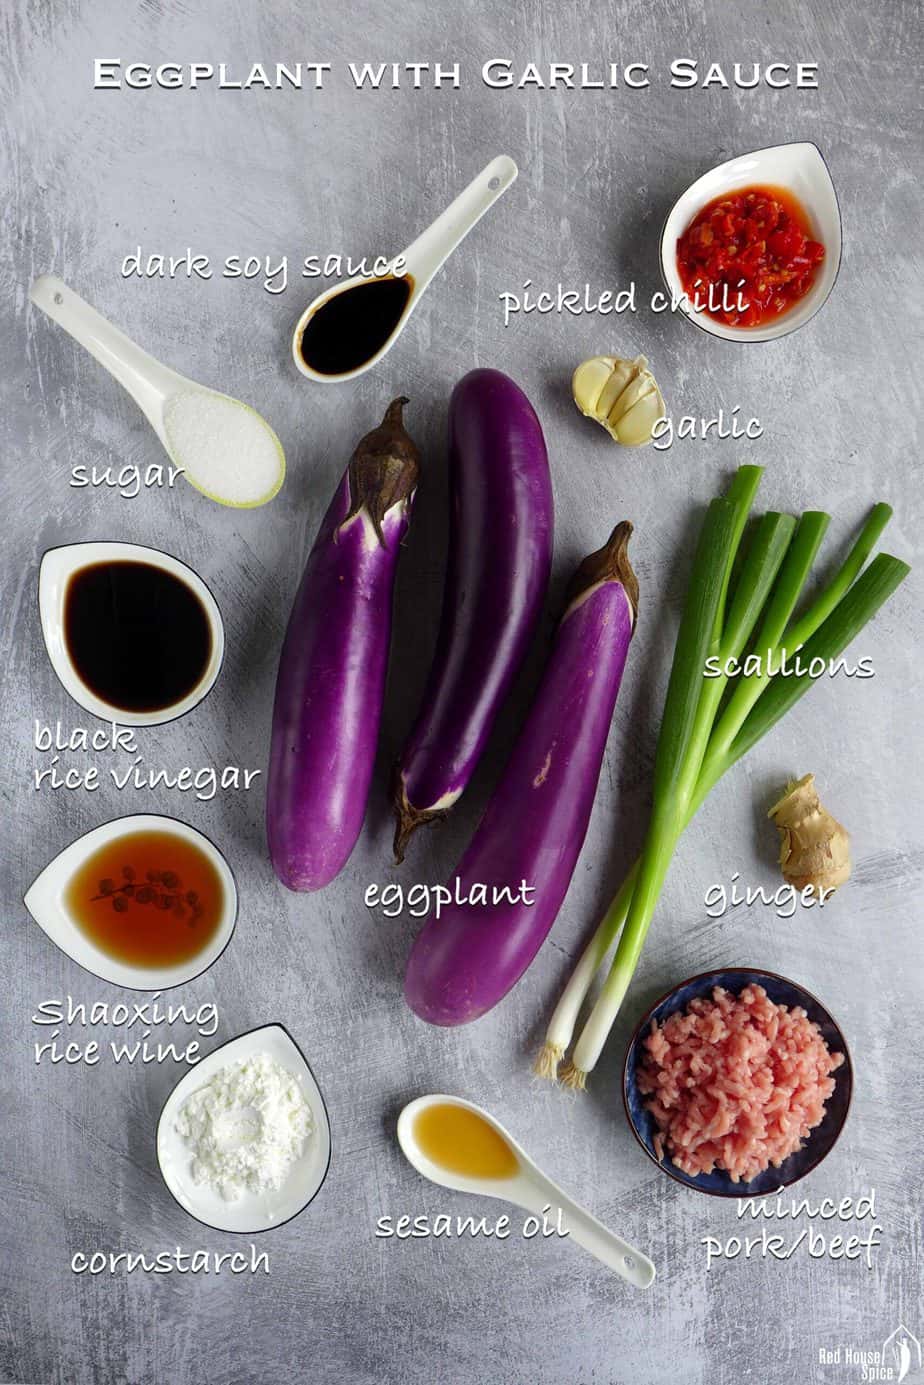 All the ingredients for making eggplant with garlic sauce